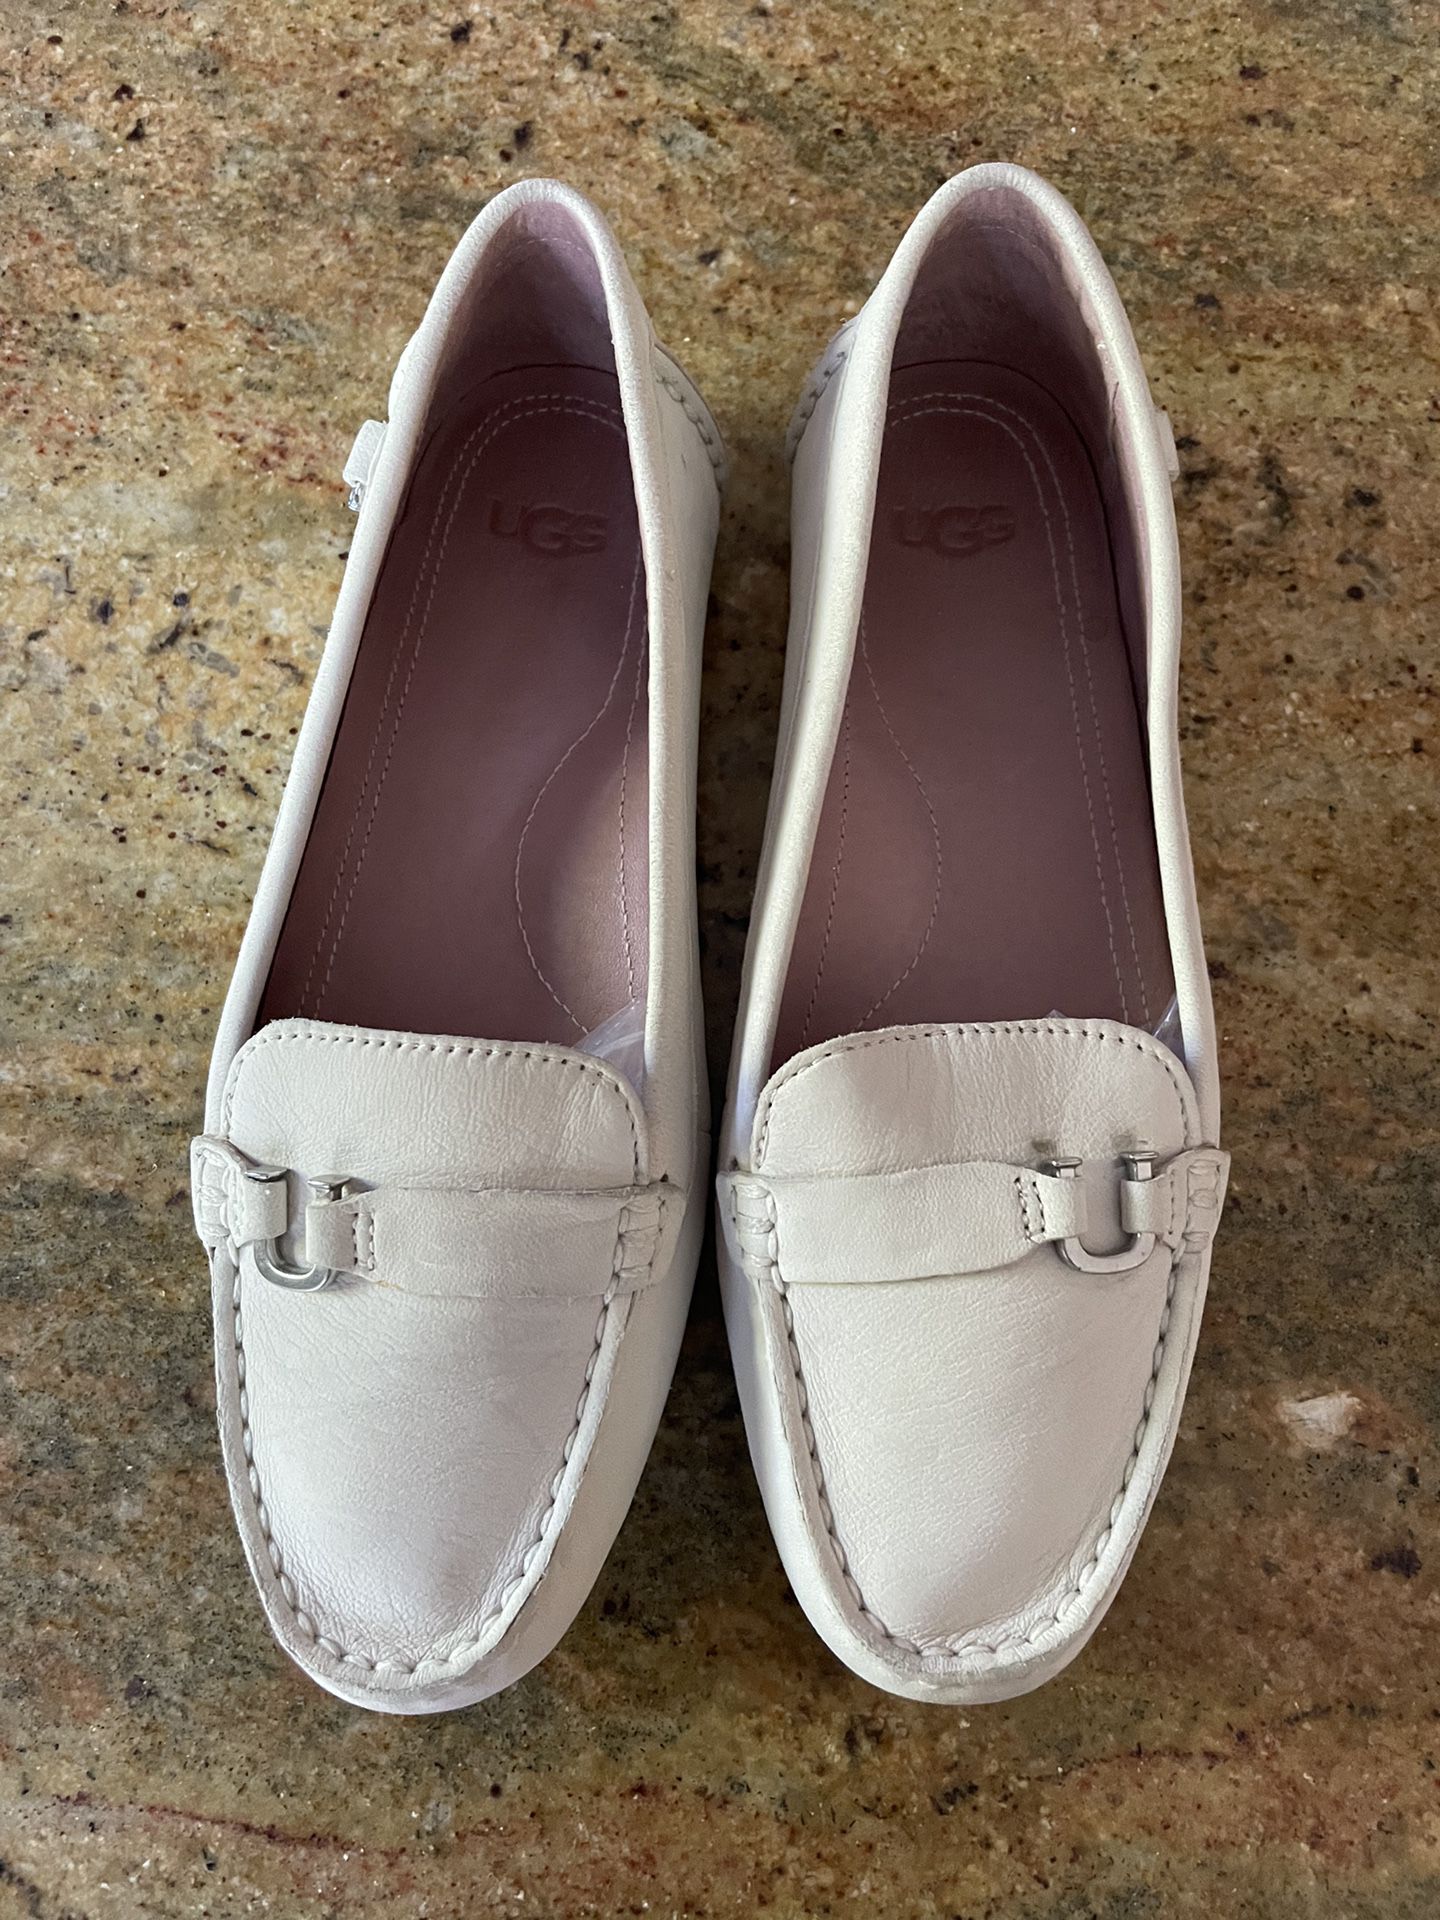  Ugg Rozie Women’s Flats  Antique White    Size 6.5